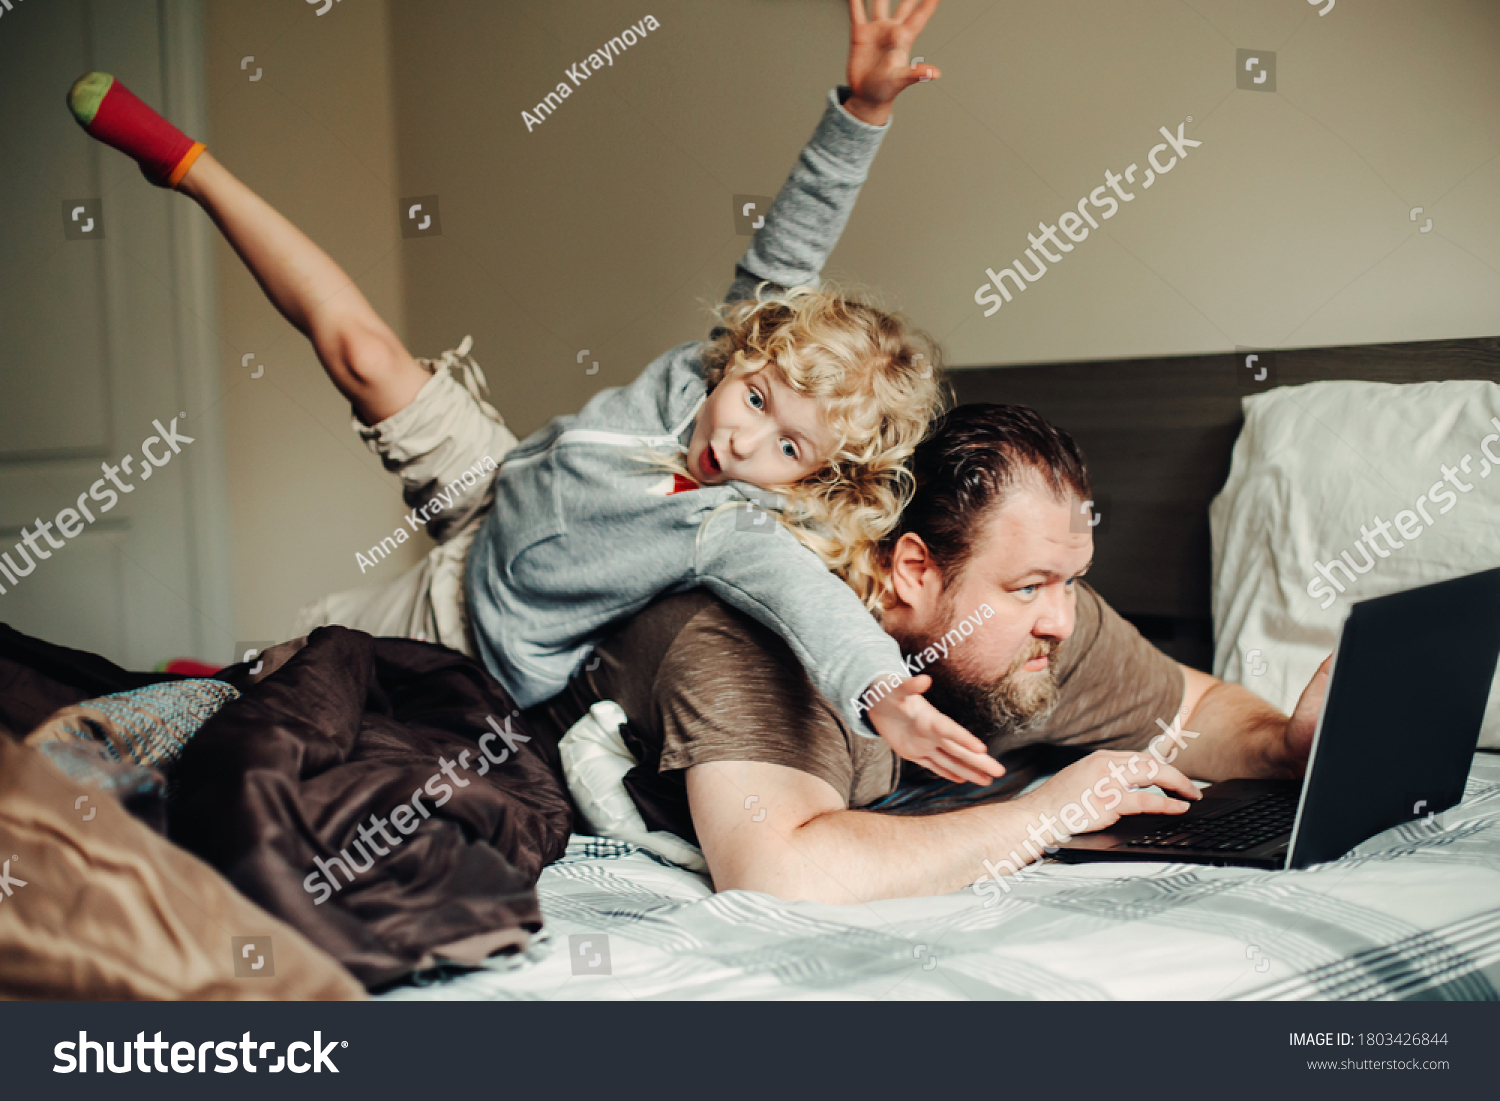 Work from home with kids children. Father working on laptop in bedroom with child daughter on his back. Funny candid family moment. New normal during coronavirus self-isolation quarantine. #1803426844